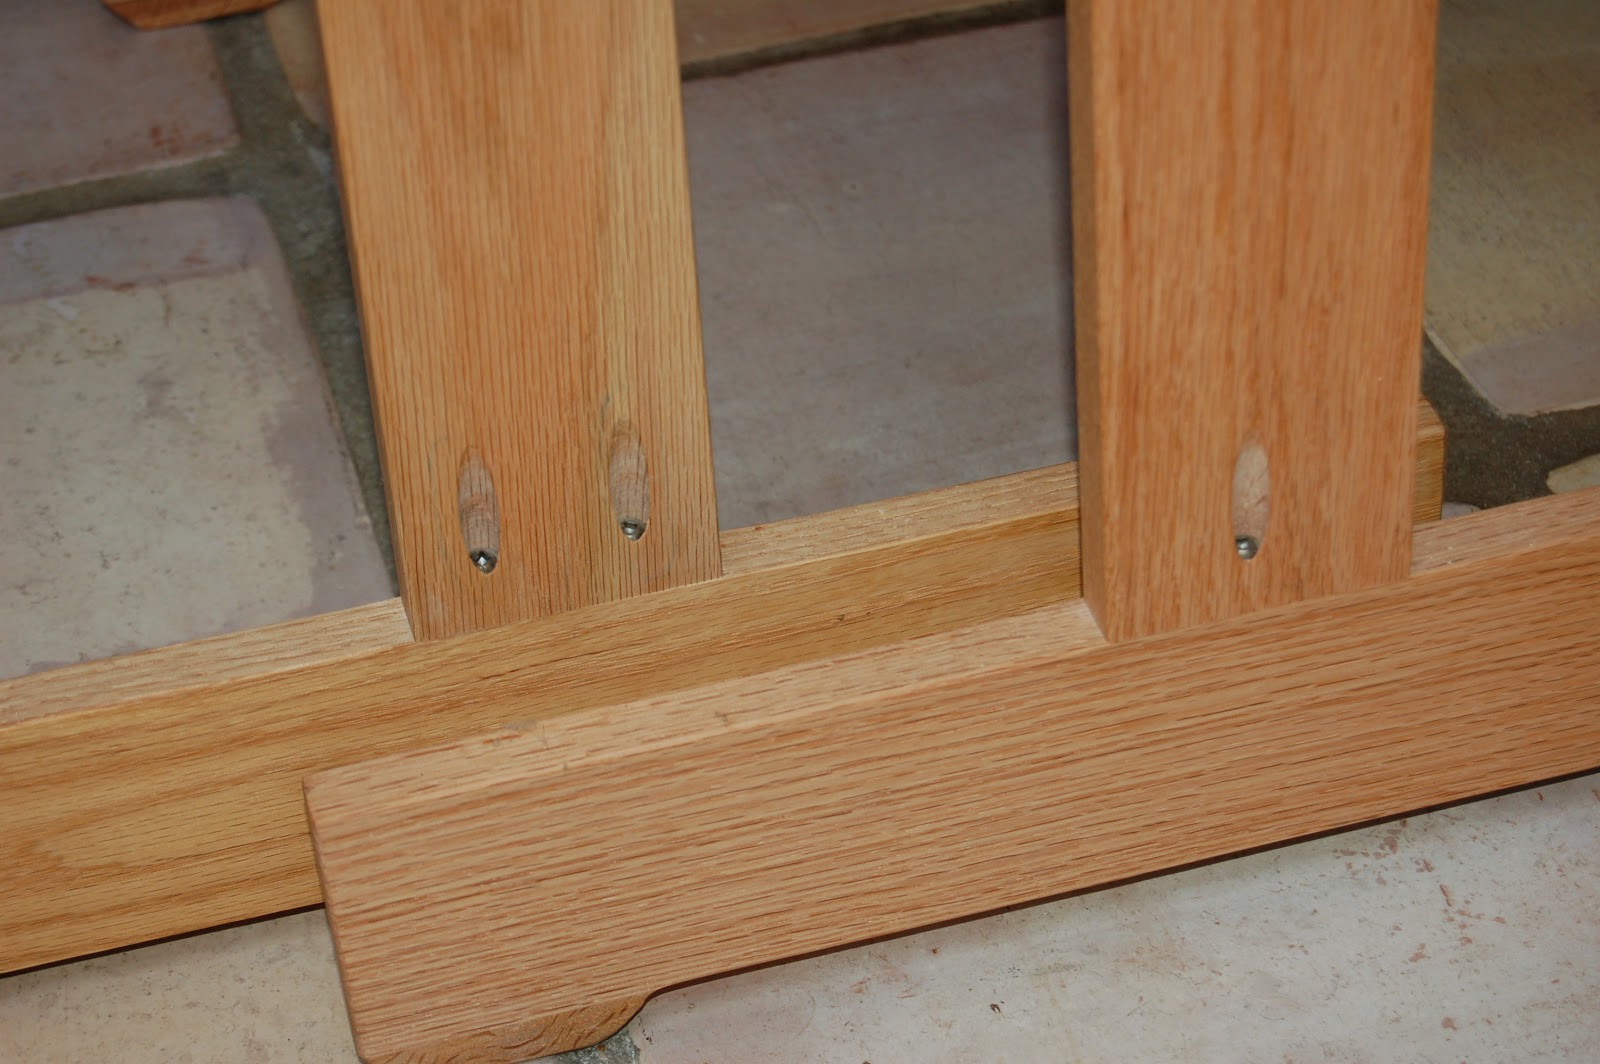 Woodworks Made Easy - Why Pocket hole joinery?